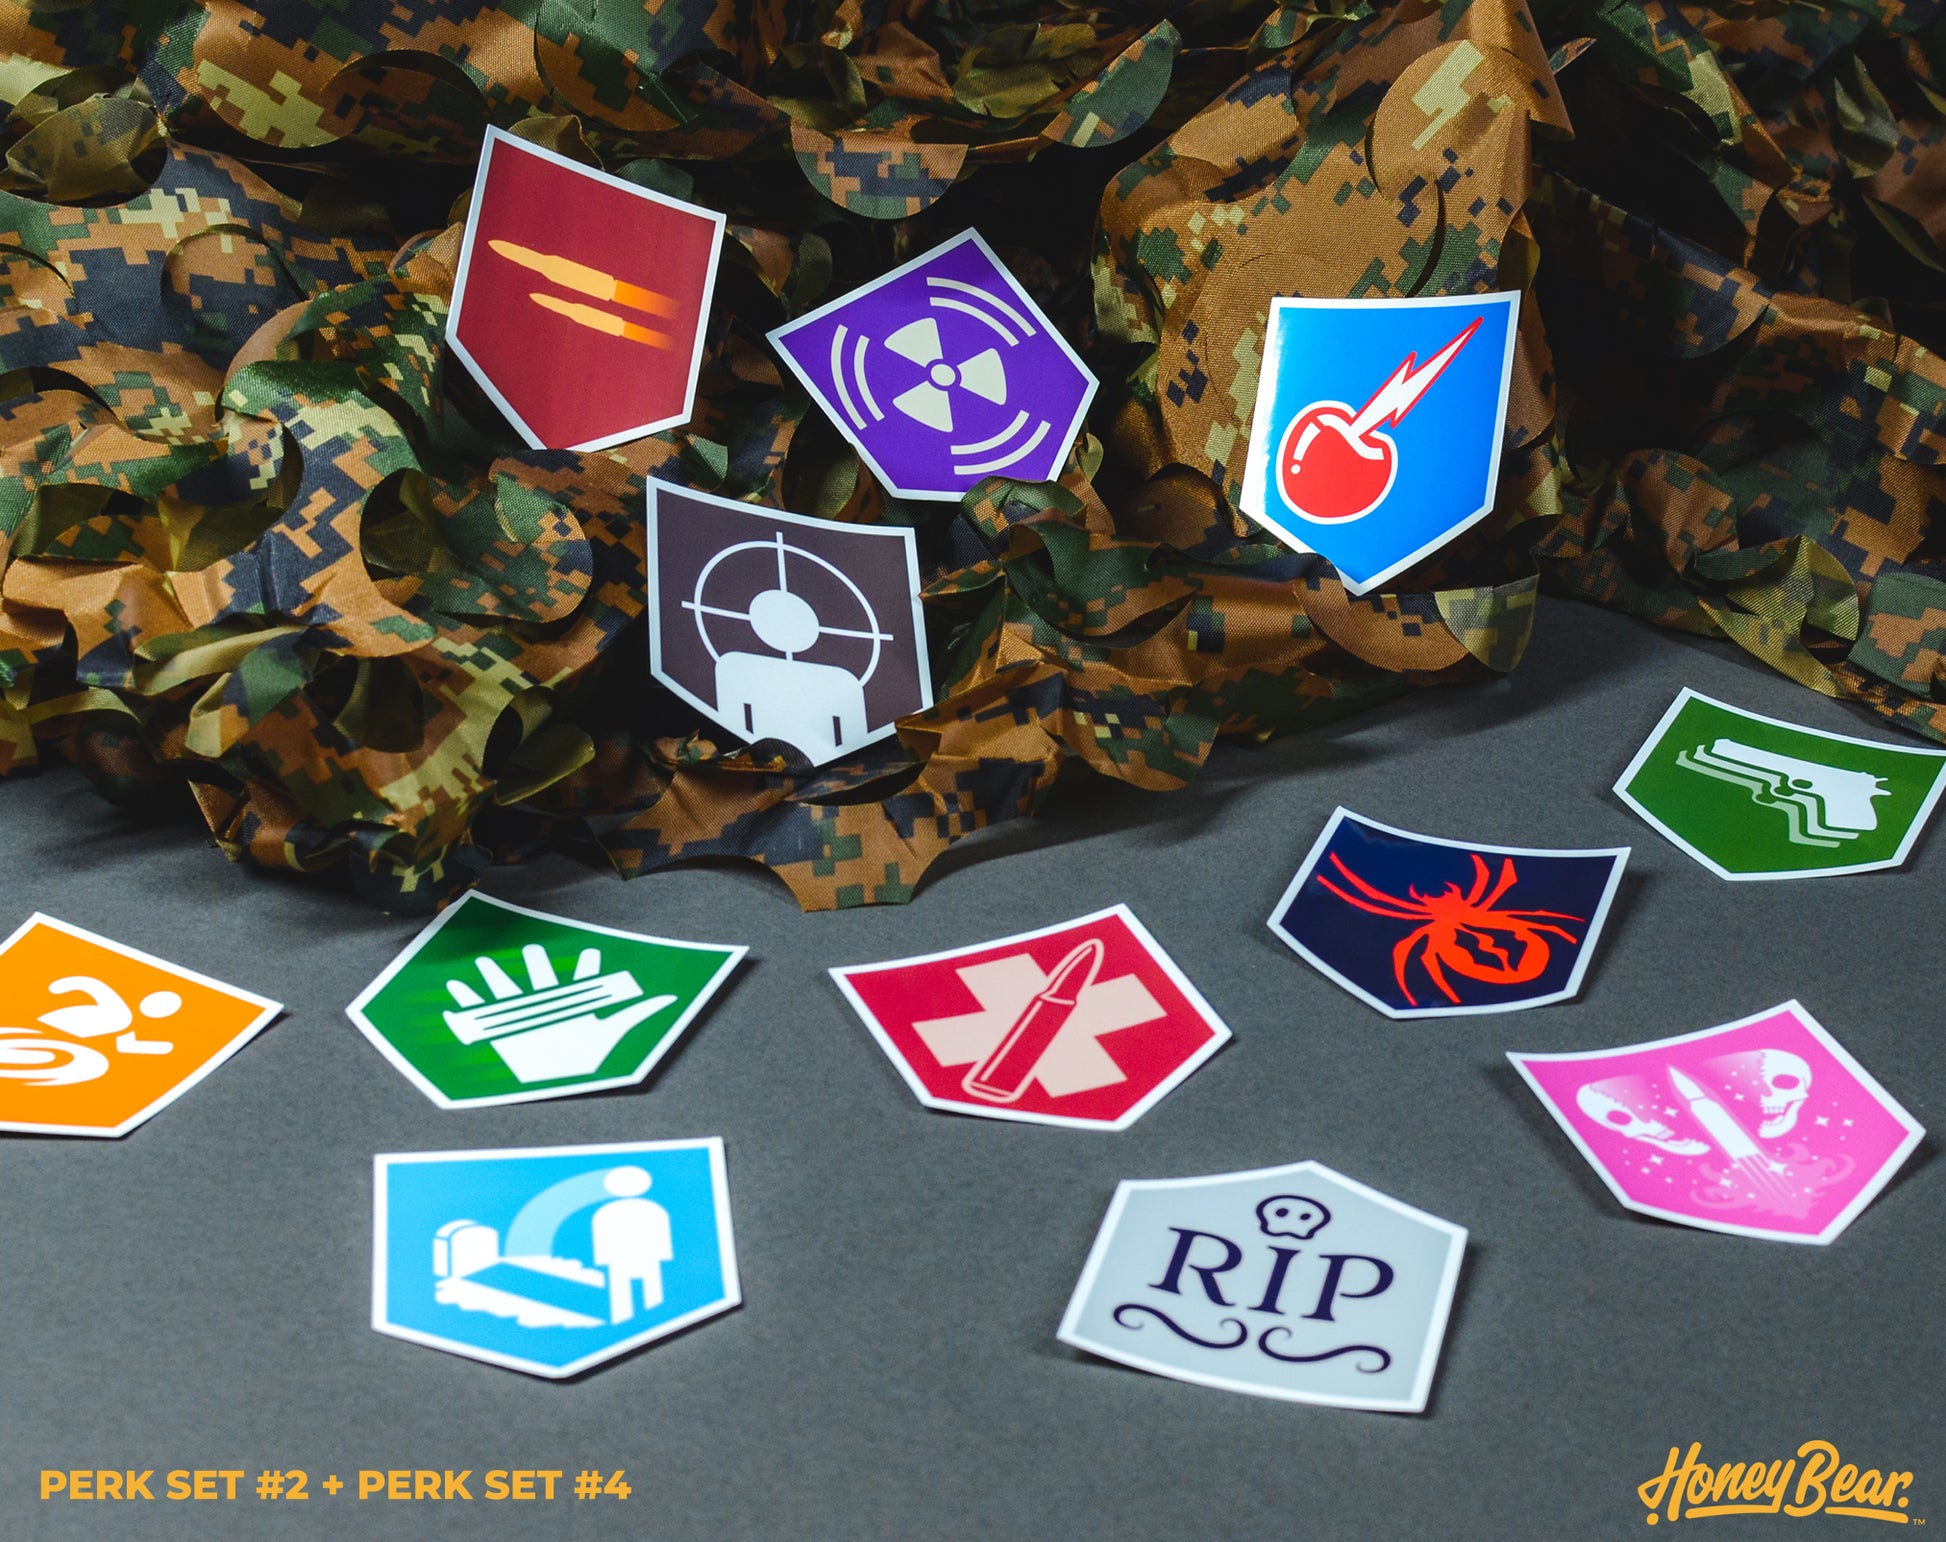 Exclusive sticker set featuring various perks from iconic zombie-themed games, a must-have for gaming enthusiasts.